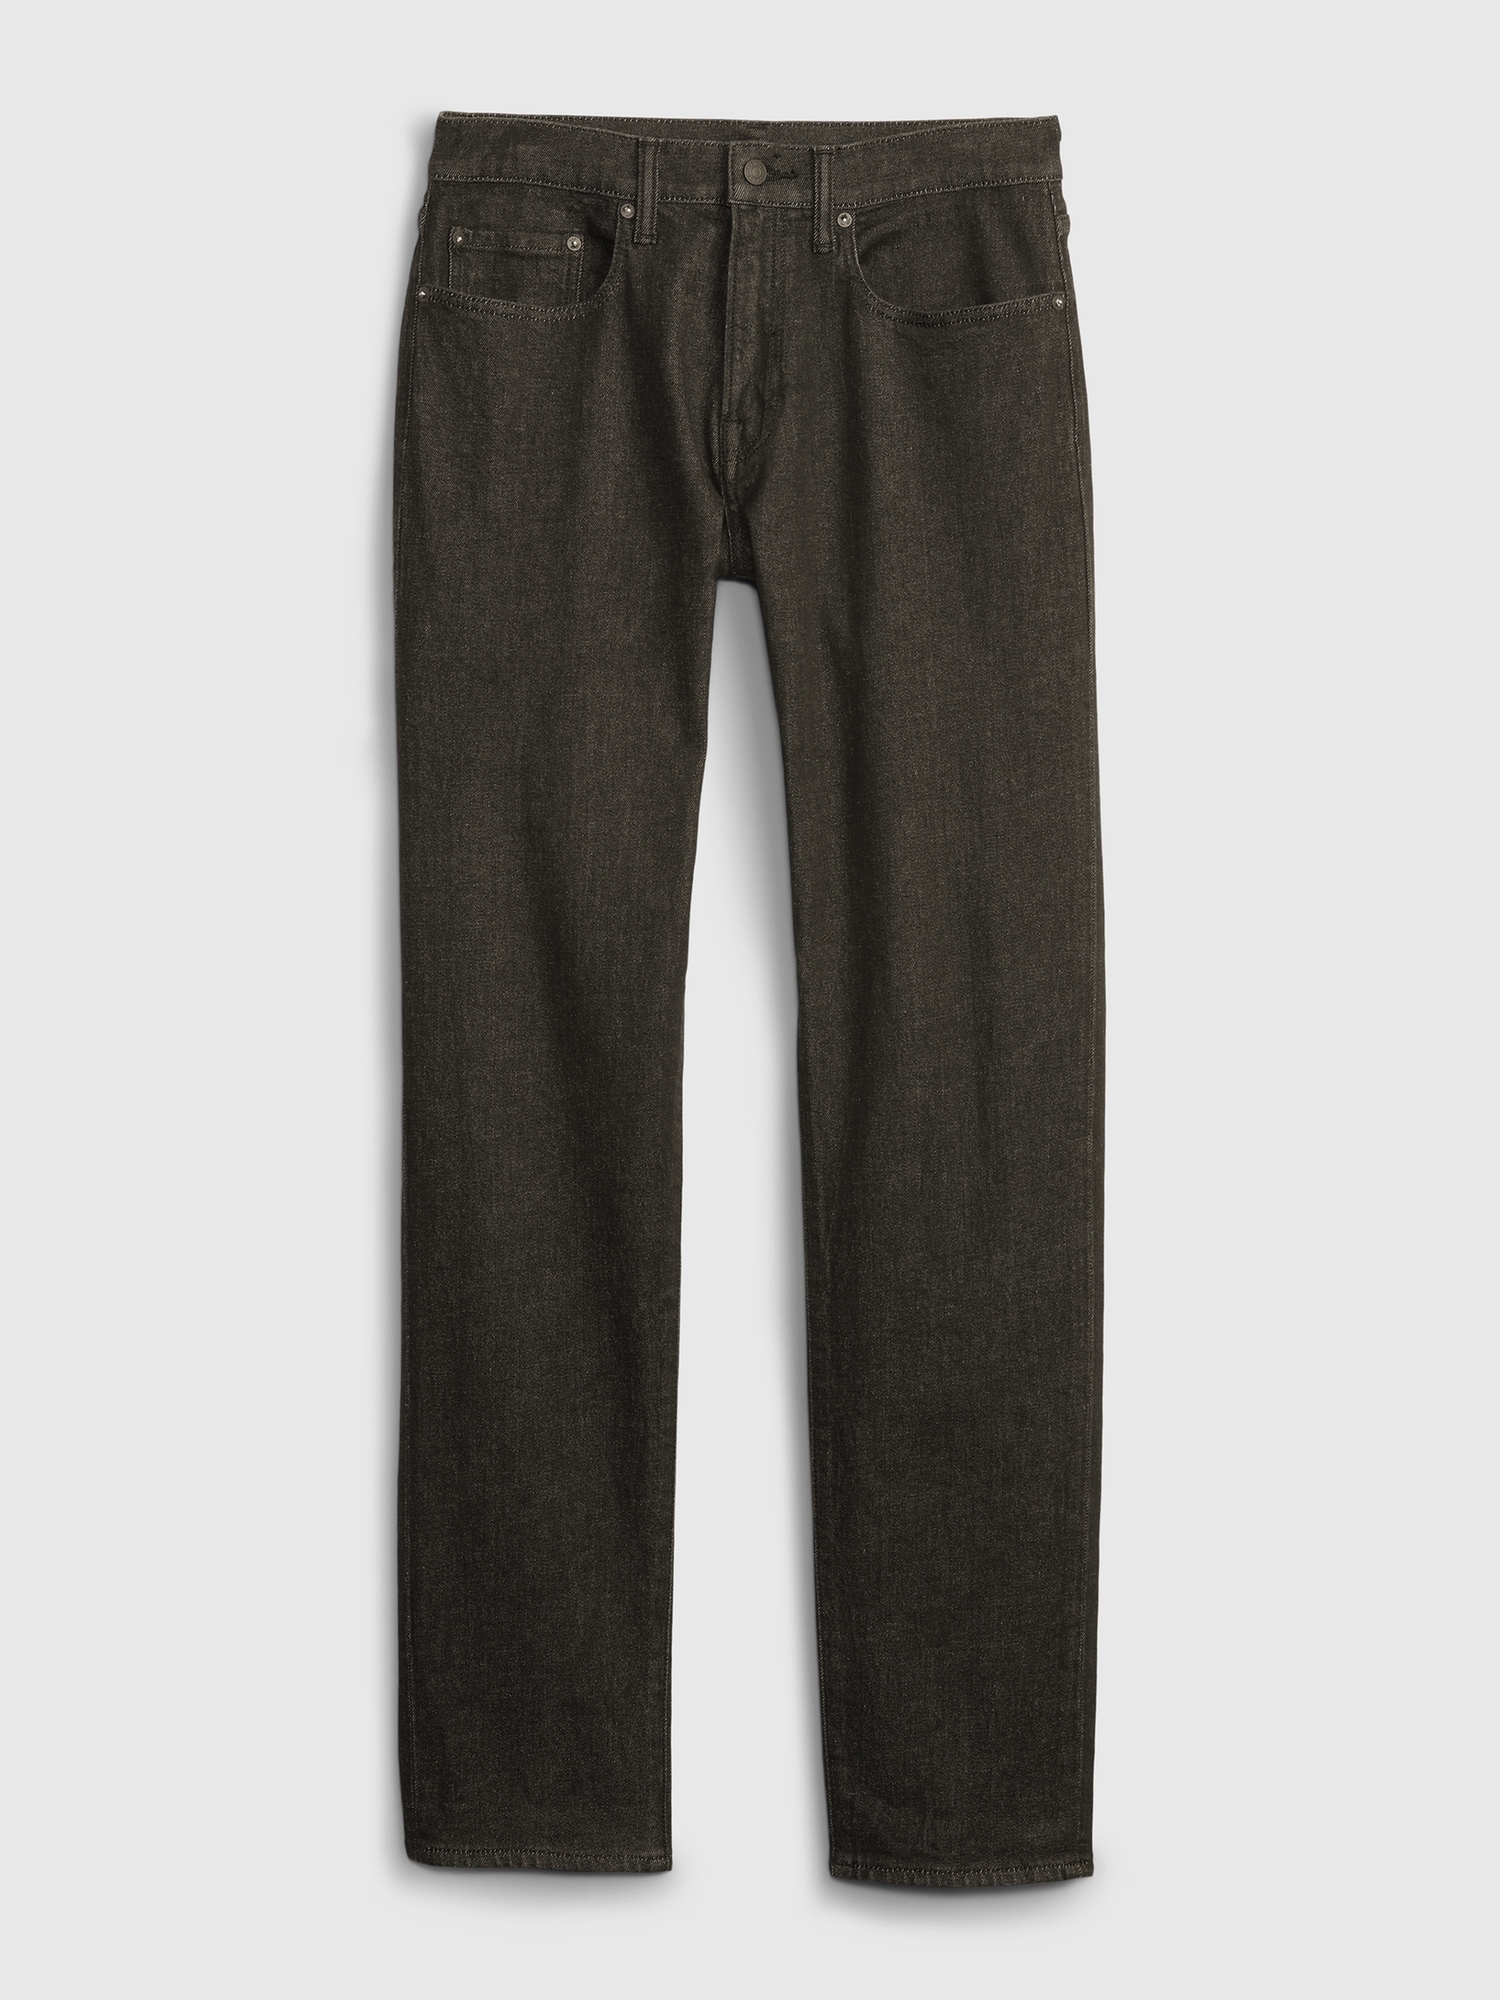 Buy Gap Blue Stretch Slim Fit Soft Wear Jeans from Next Luxembourg